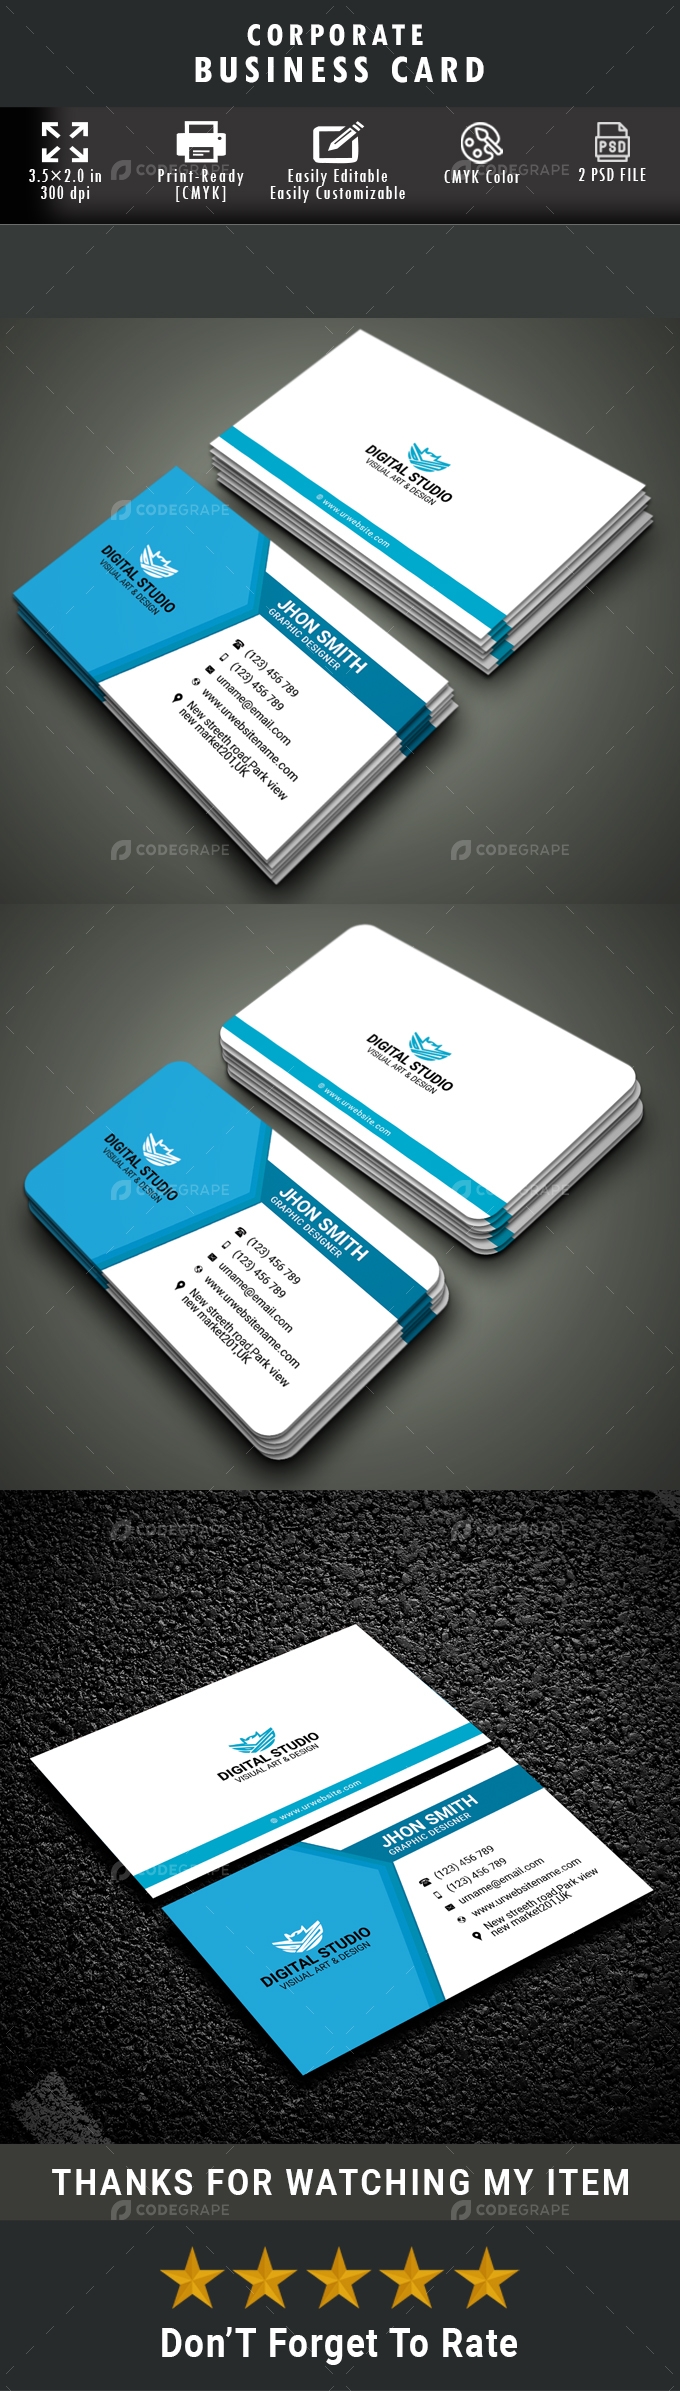 Clean Corporate business card